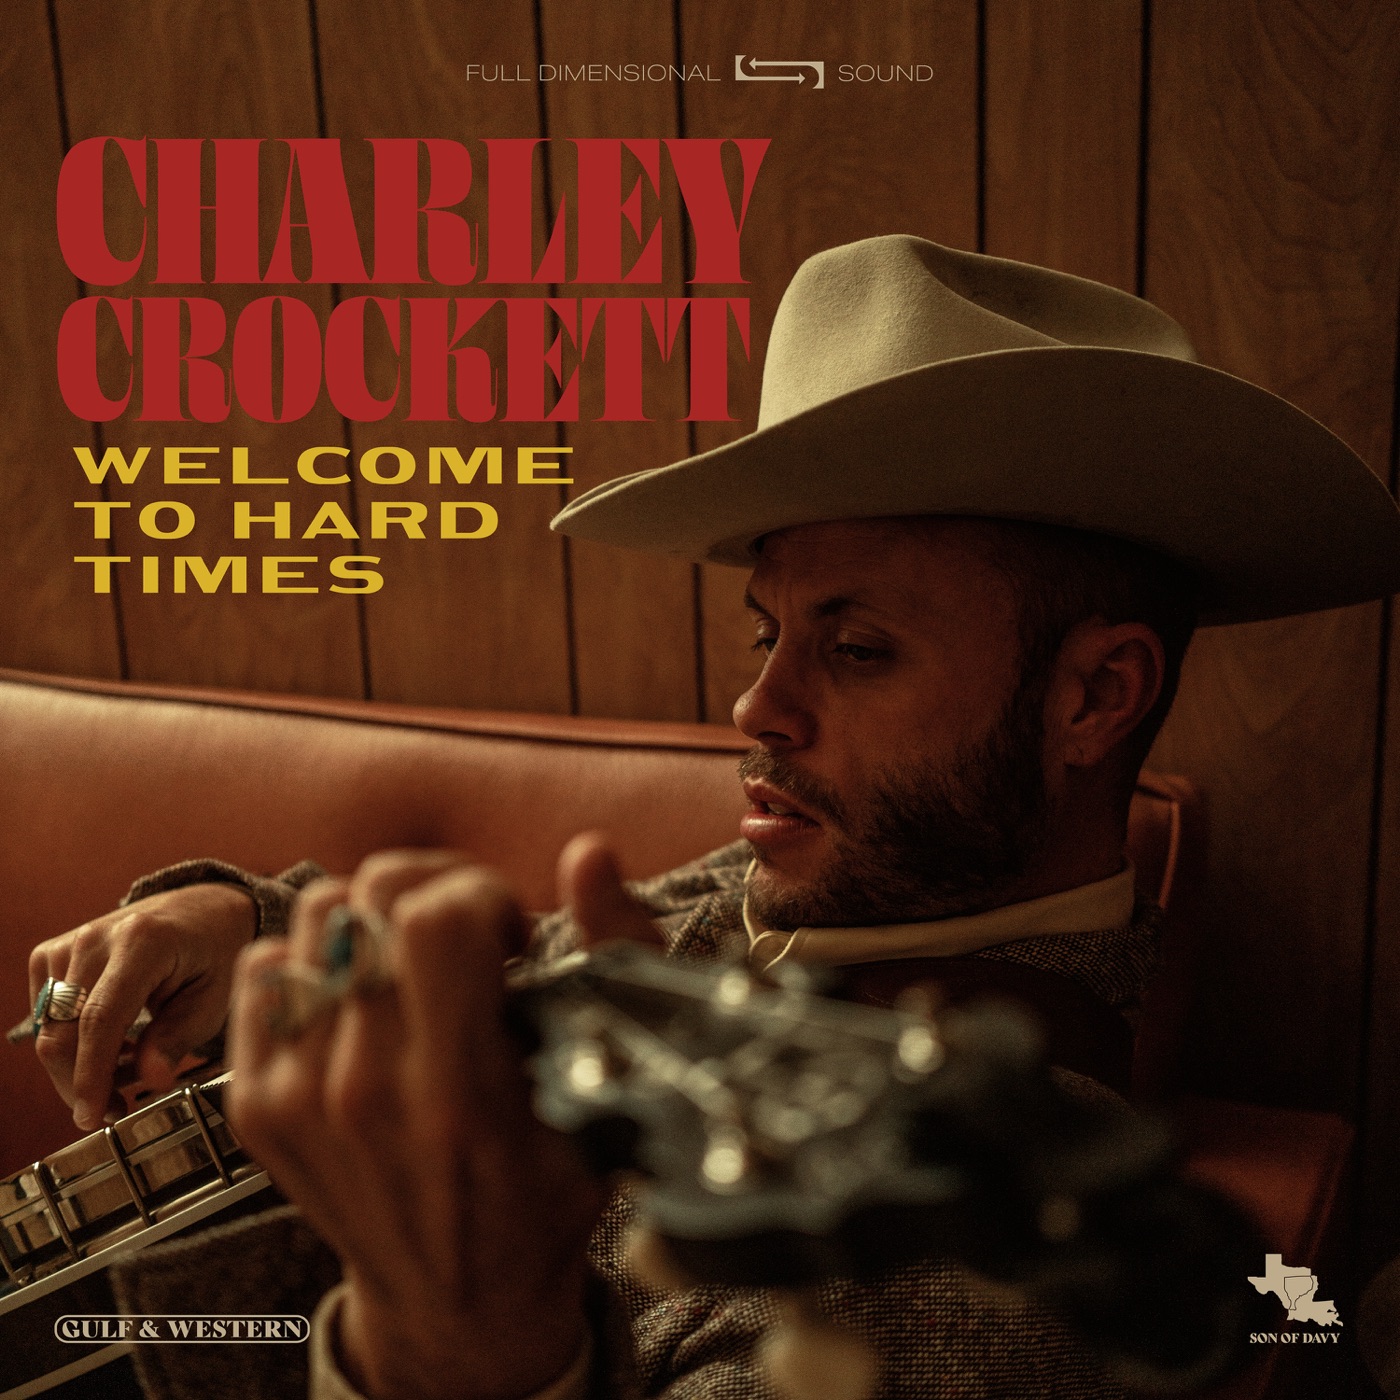 Welcome to Hard Times by Charley Crockett